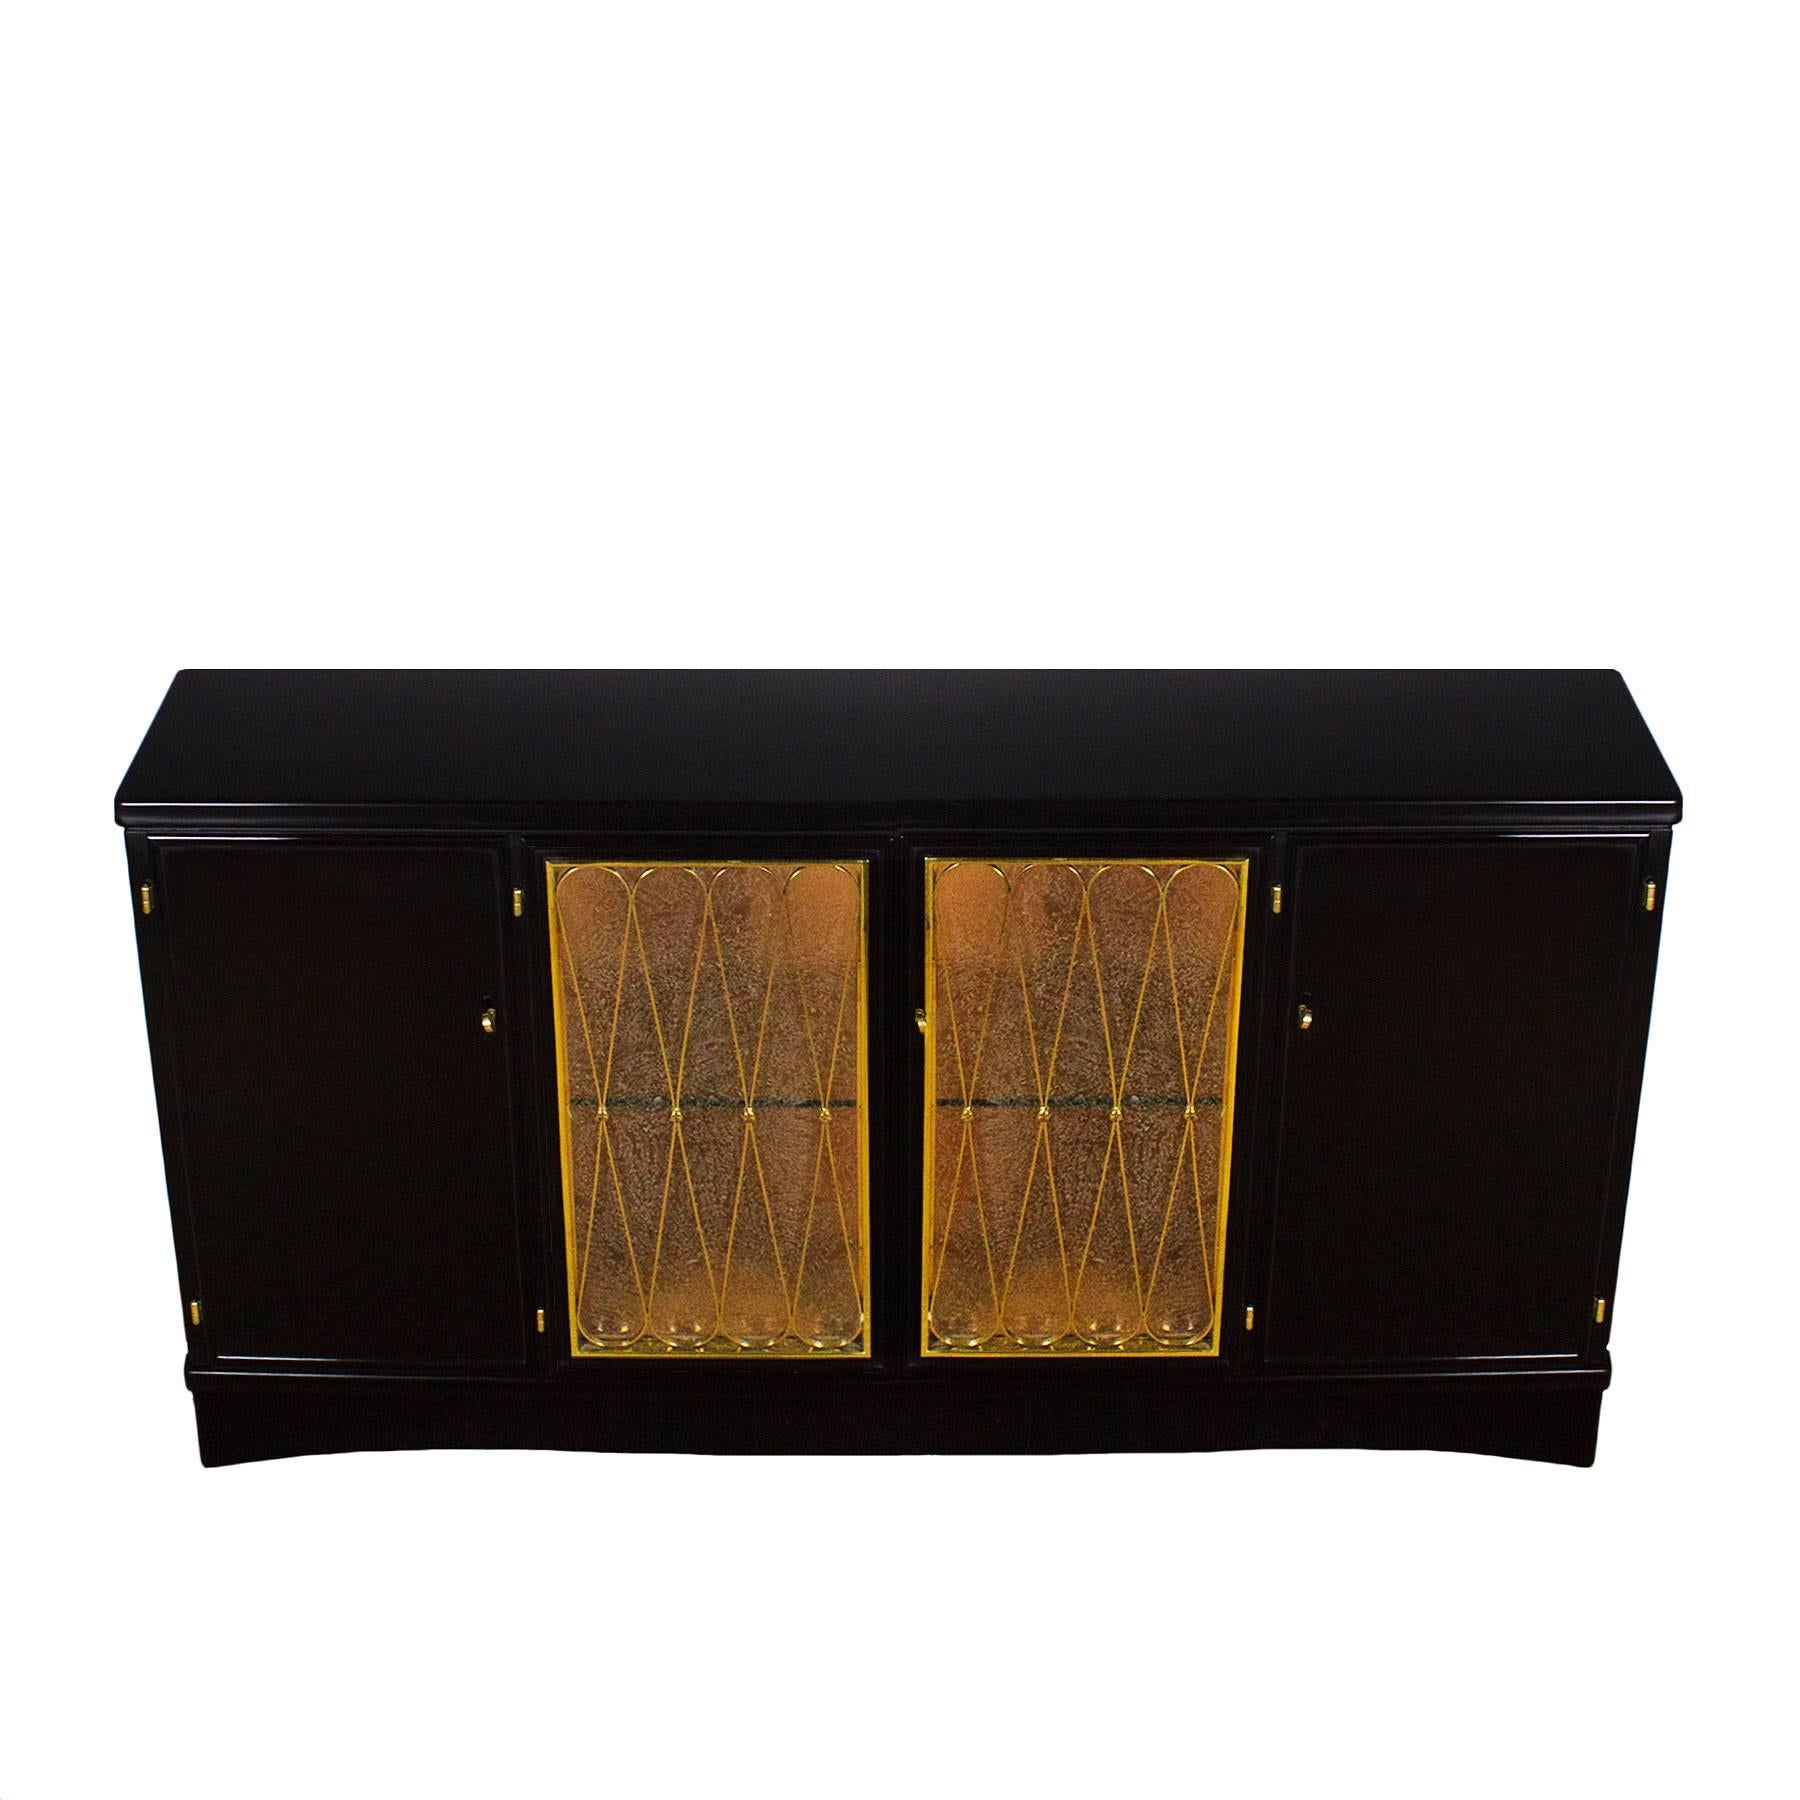 Italian Mid-Century Modern Four-Door Sideboard, Stained Walnut, Glass - Italy For Sale